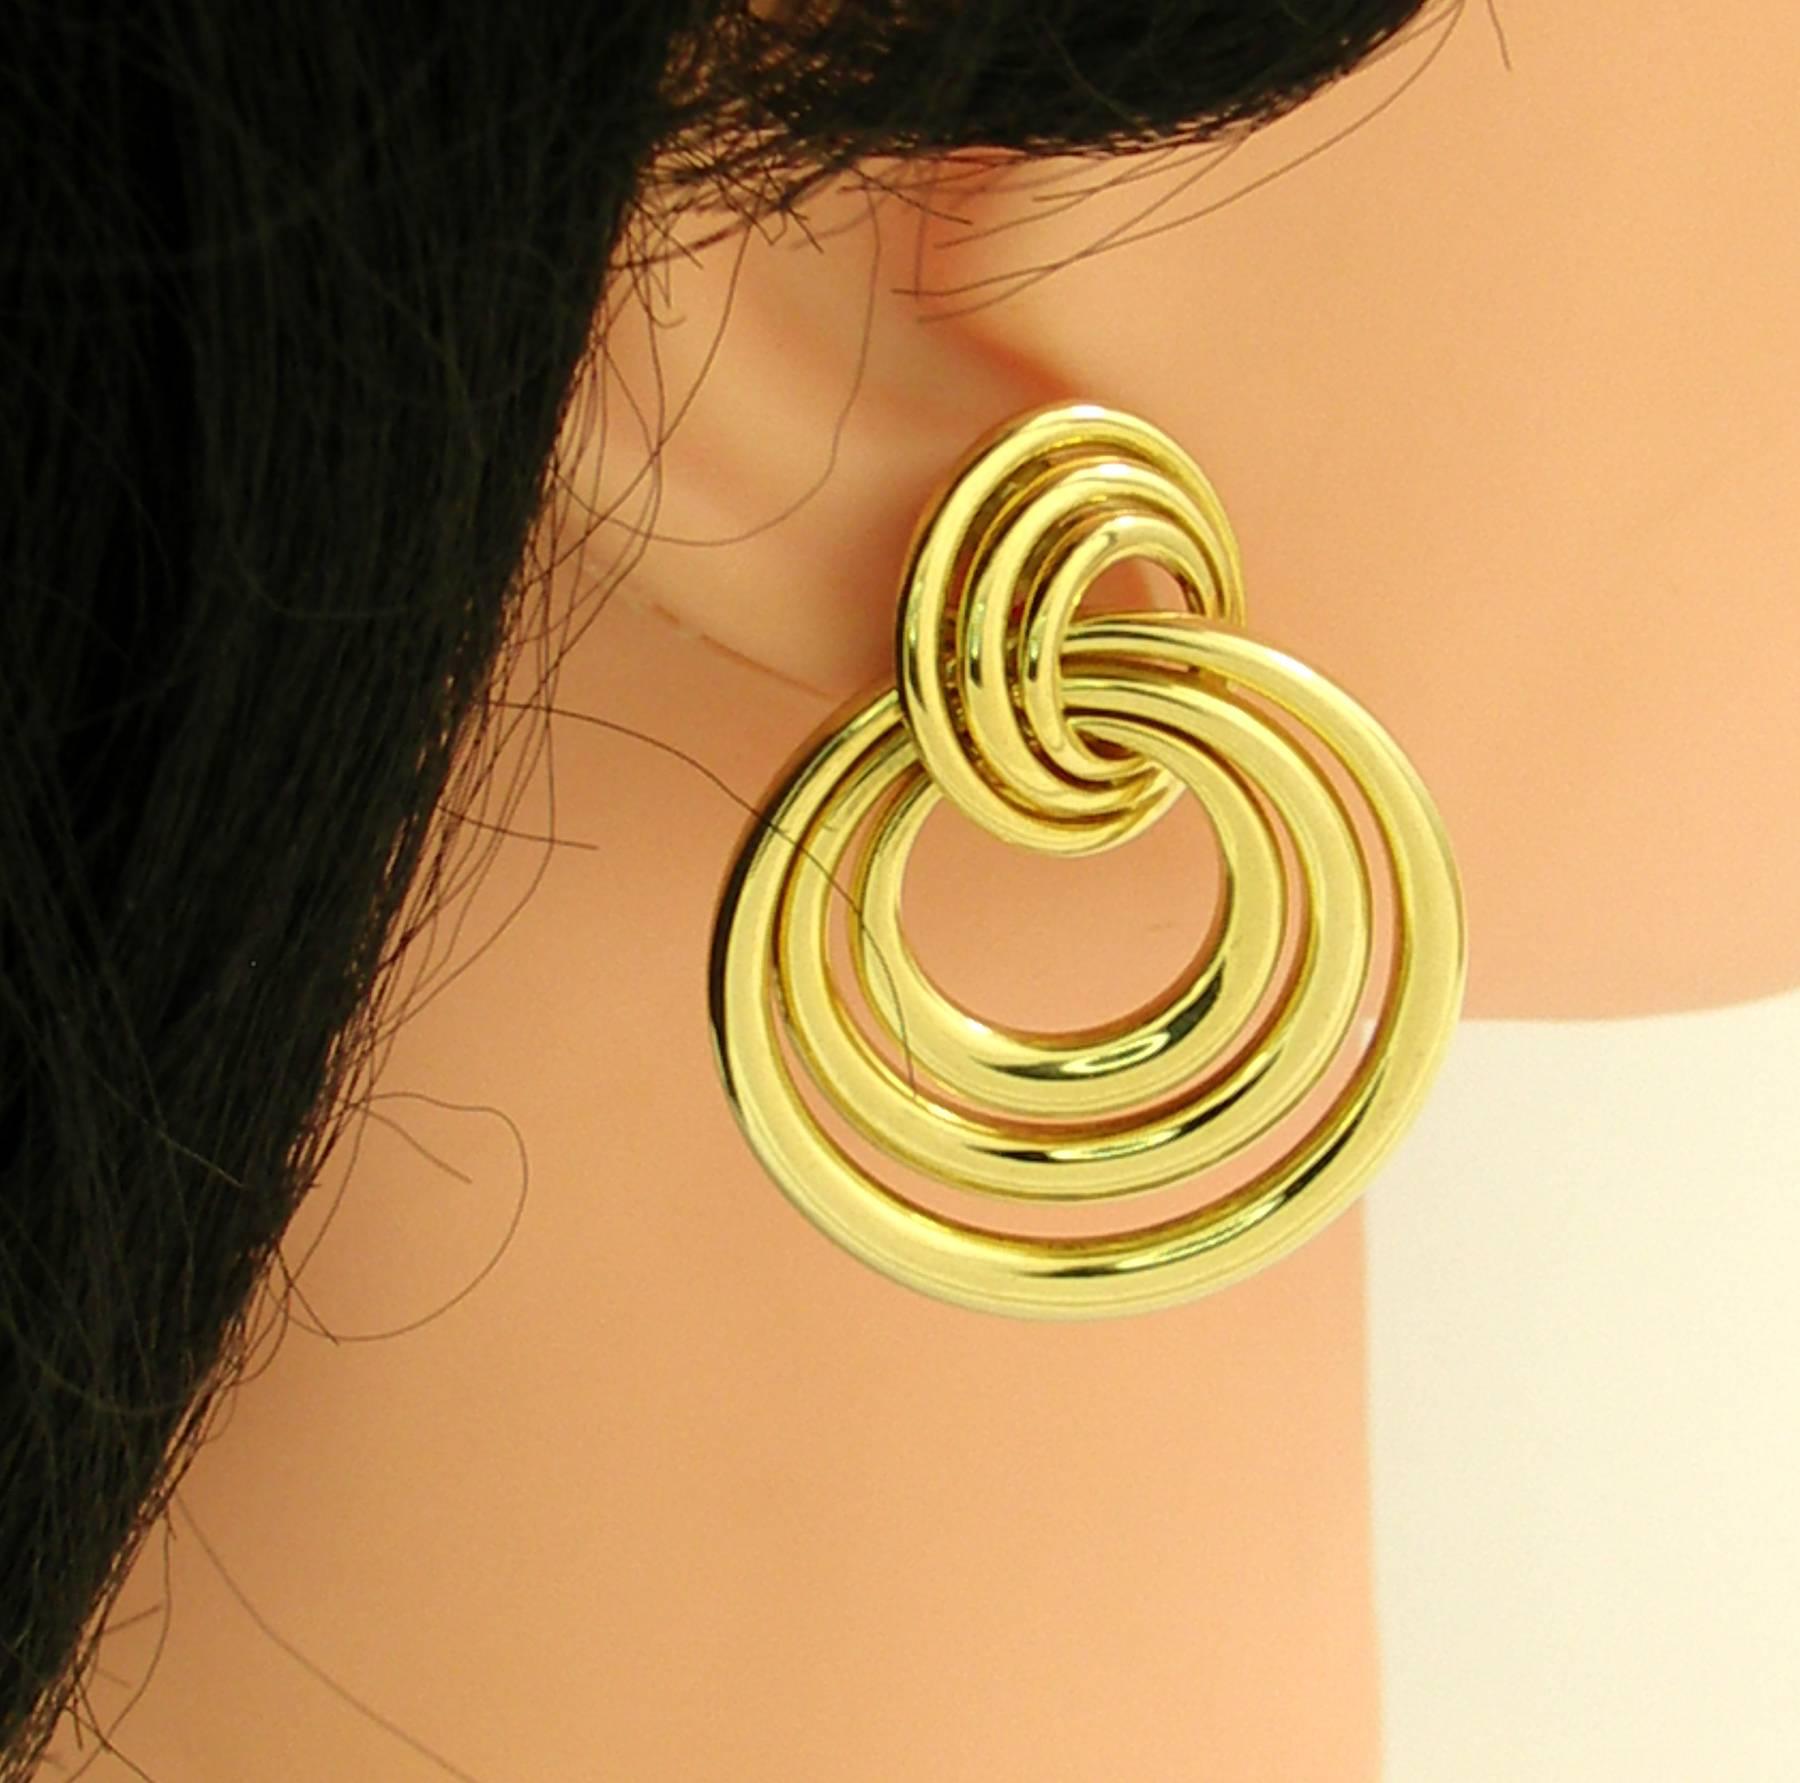 A pair of 18Kt yellow gold earrings measuring 1 9/16 long and 1 5/16 inches wide, with an artistic spiraled design. Signed Cartier